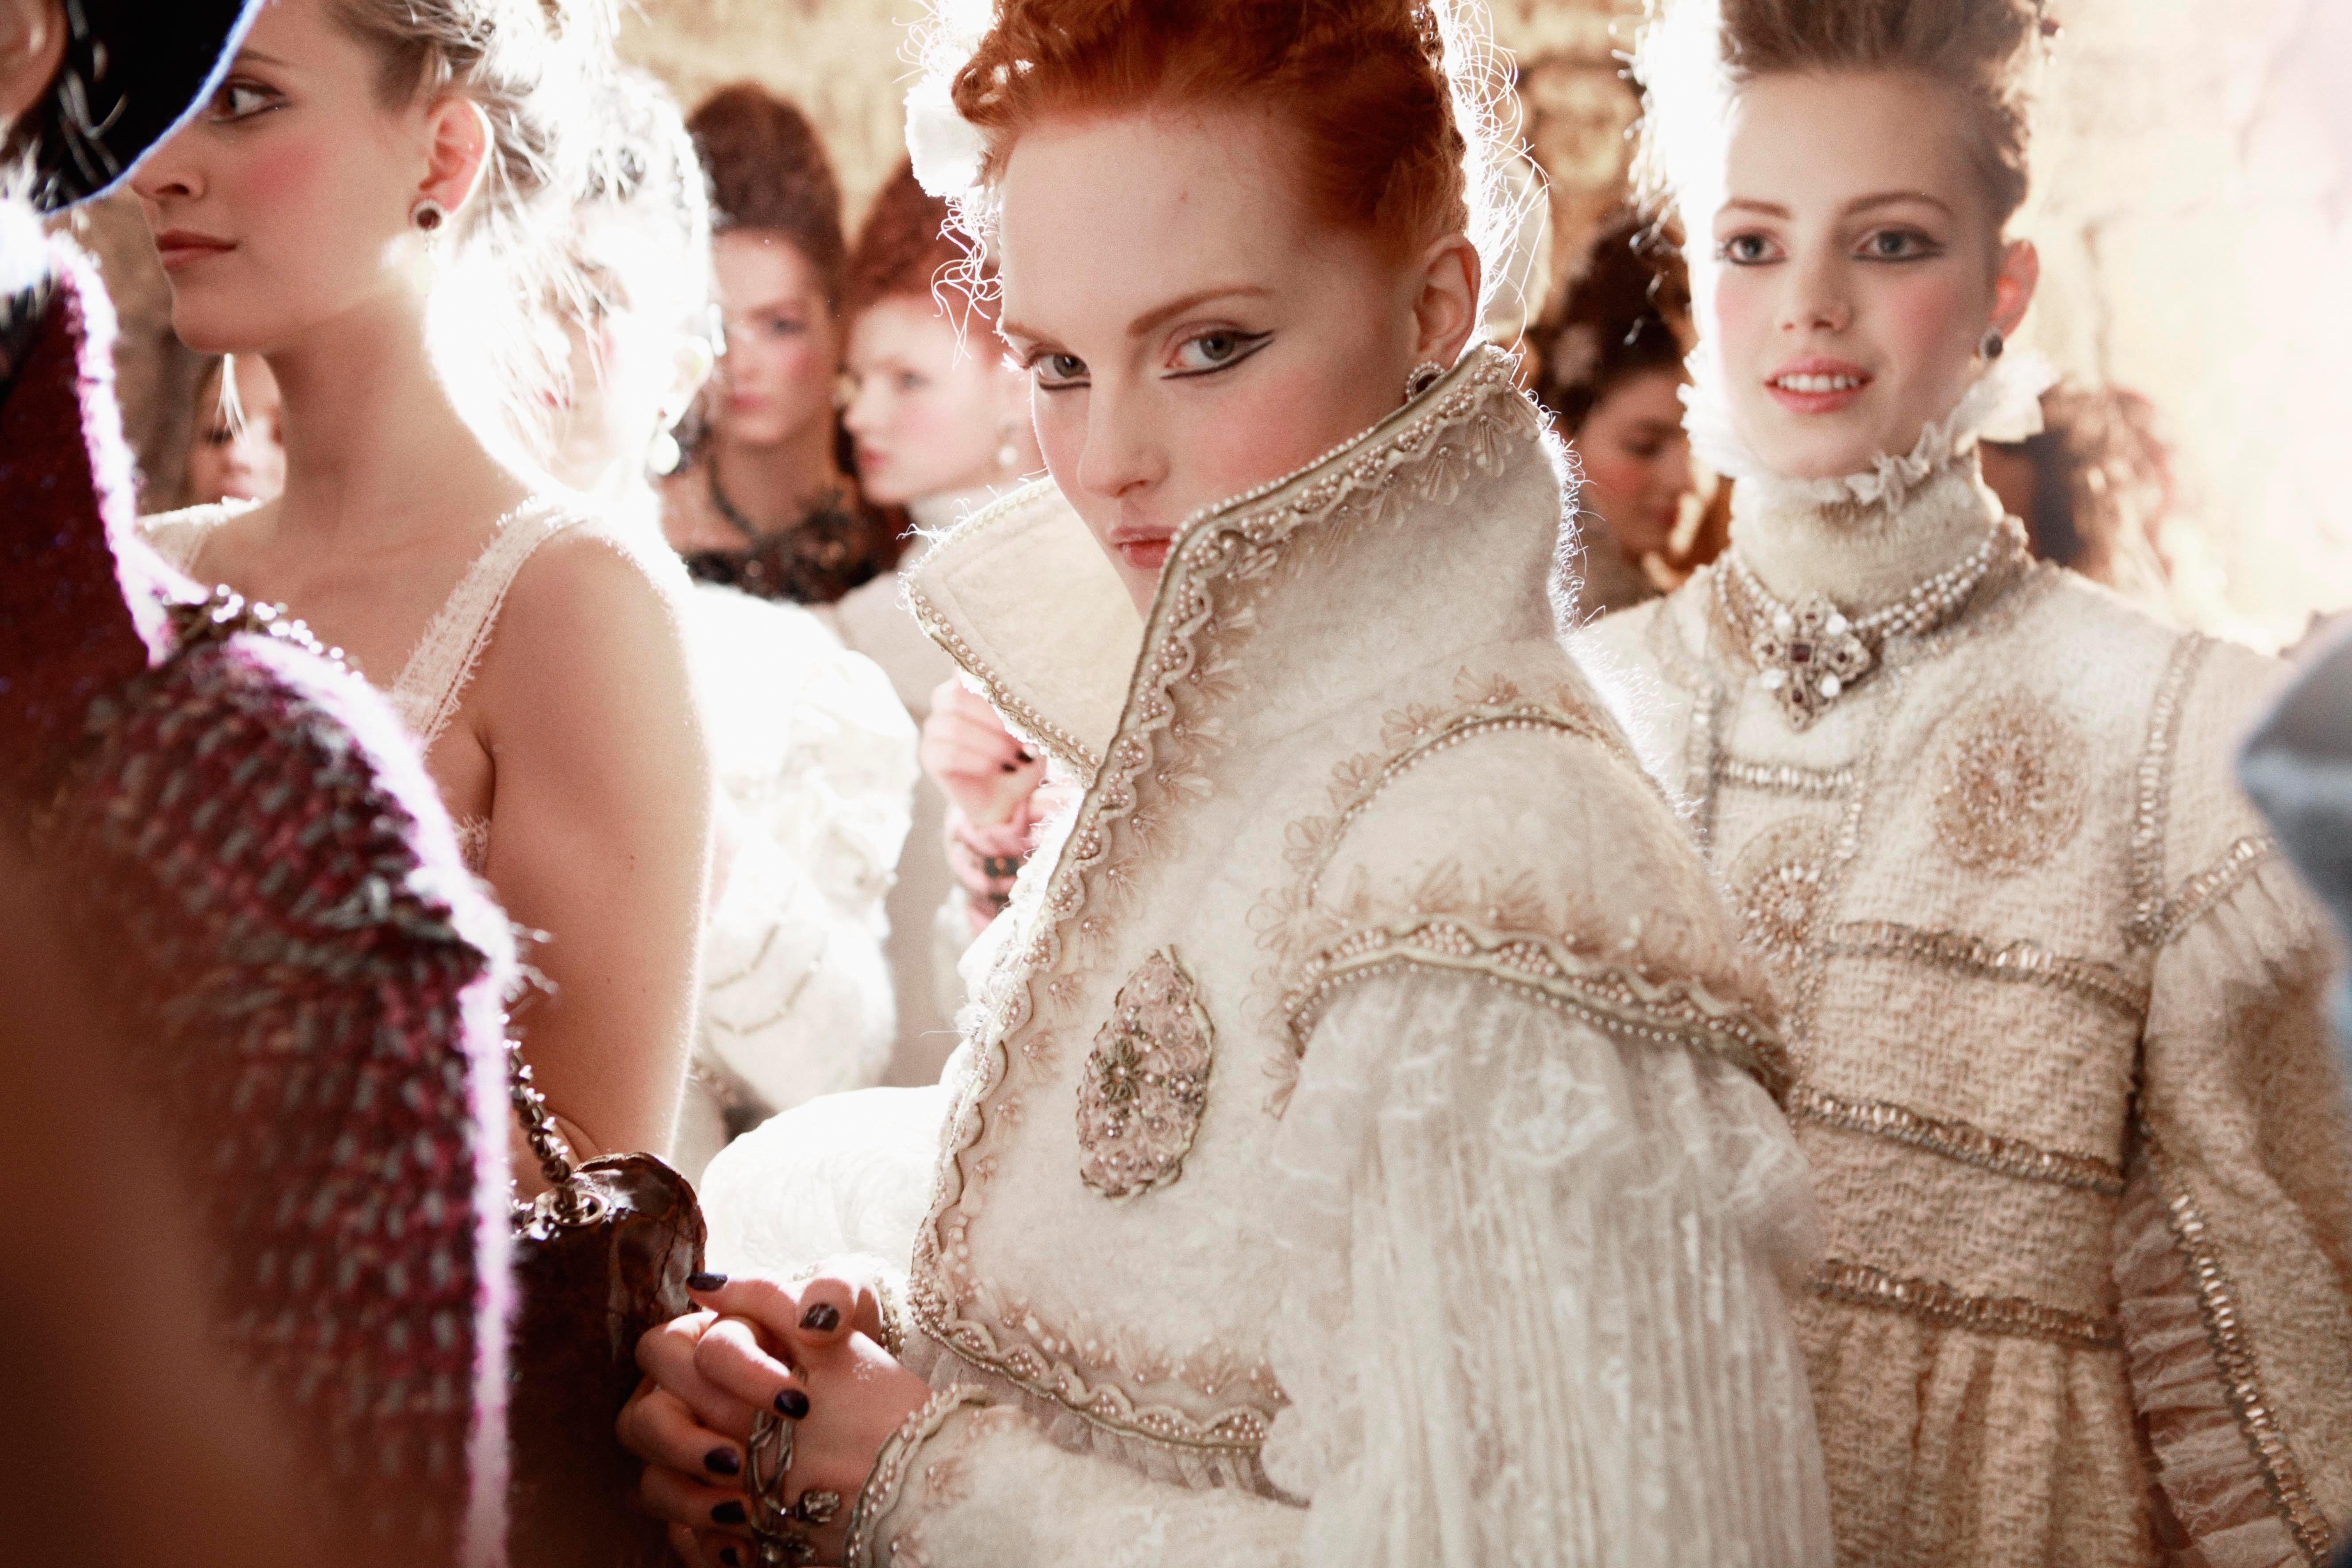 An intimate glimpse of Karl Lagerfeld backstage at Chanel's